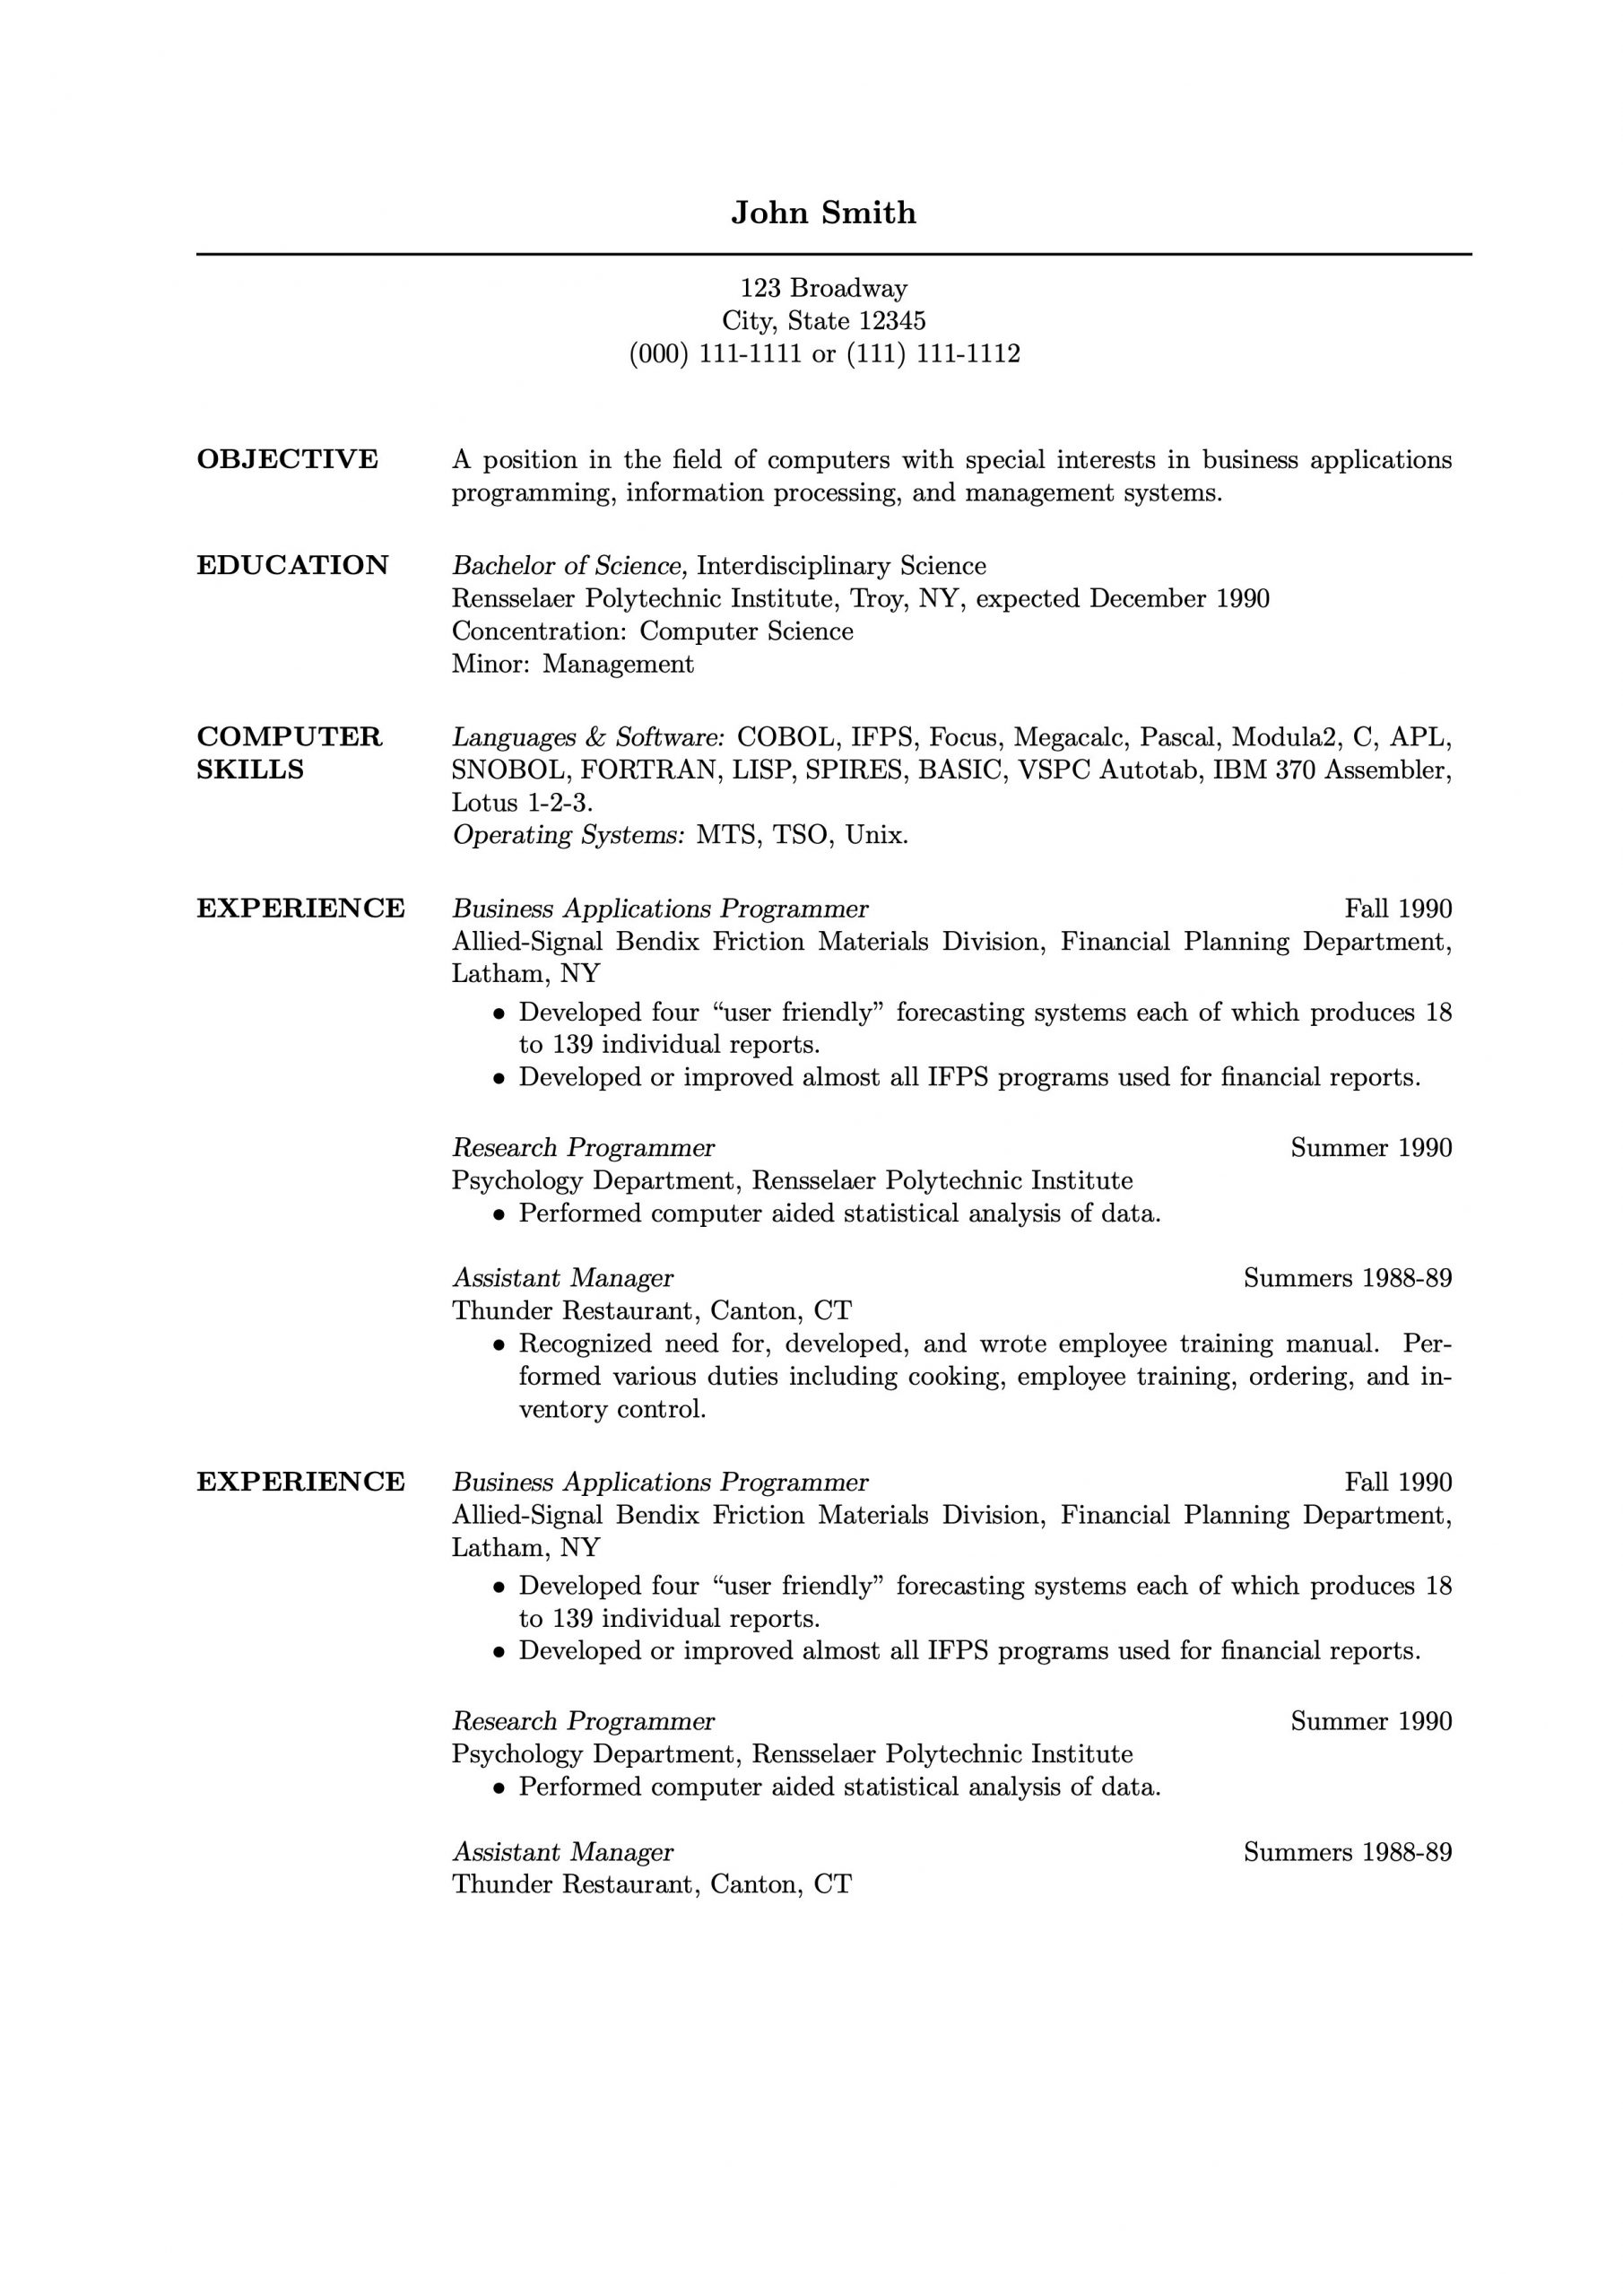 Graduate School Resume Template for Admissions Latex Templates – Cvs and Resumes